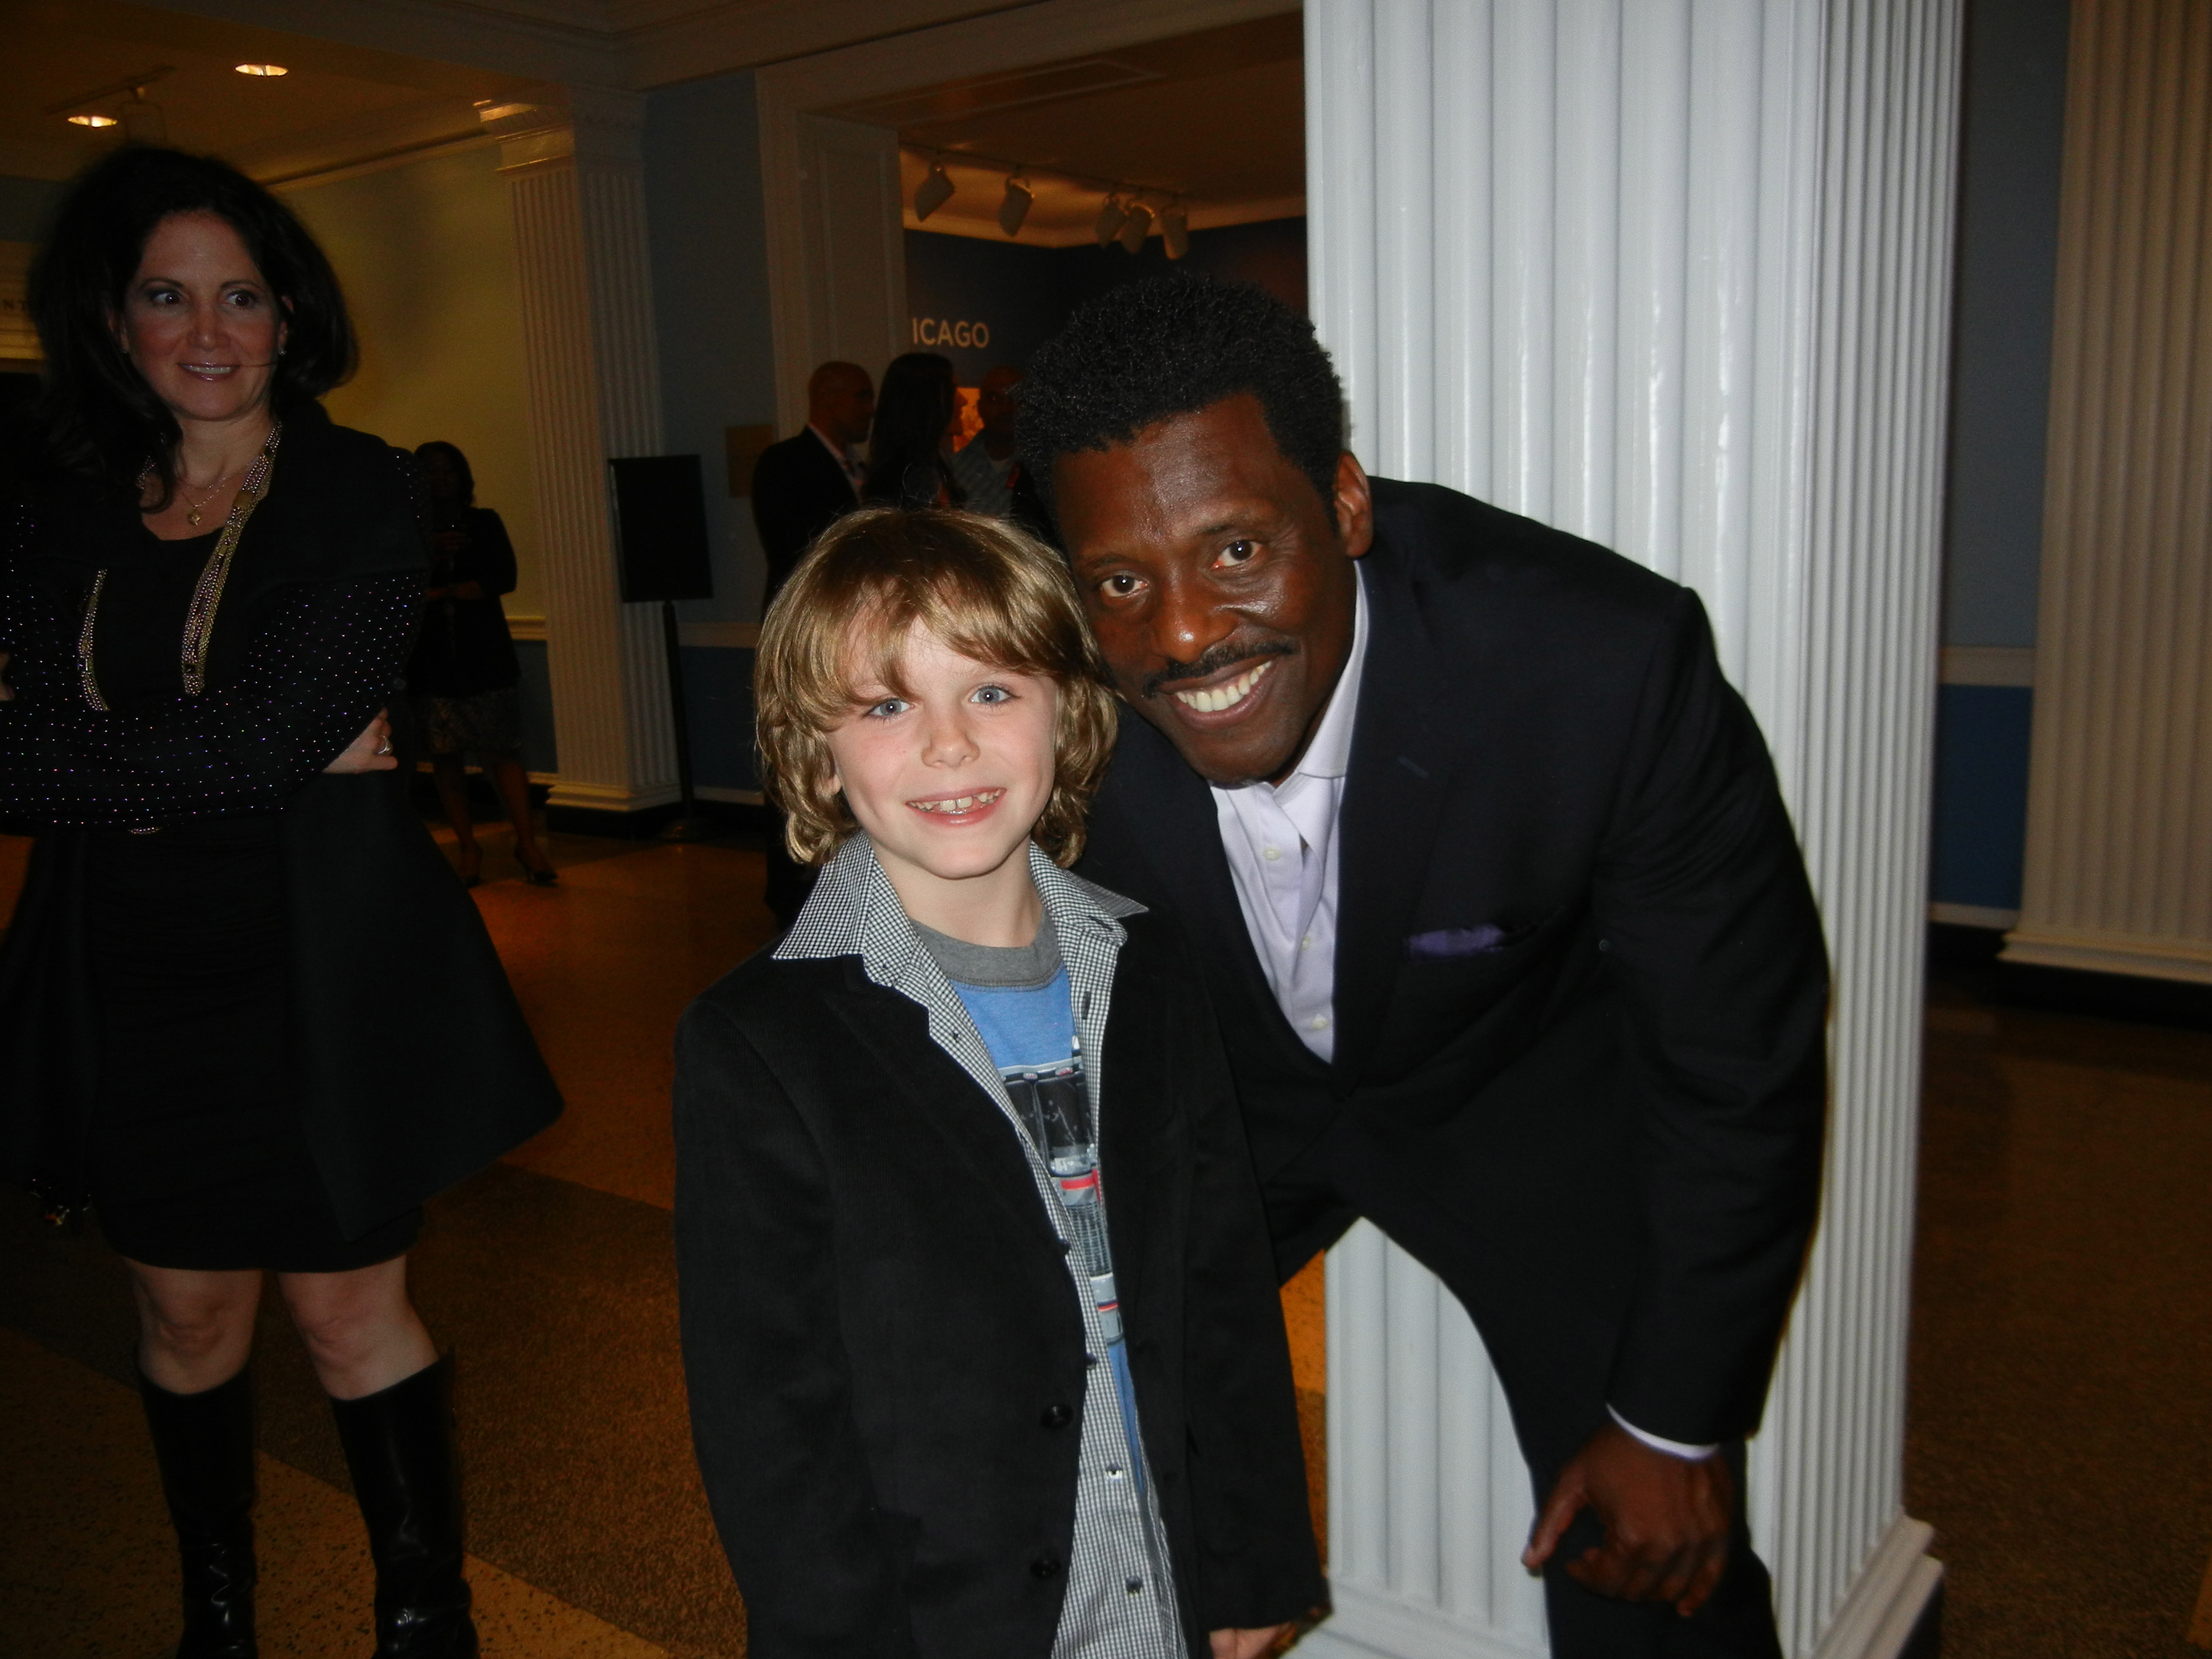 Griffin Kane with Eamonn Walker, at the Chicago Fire Premiere, 2012